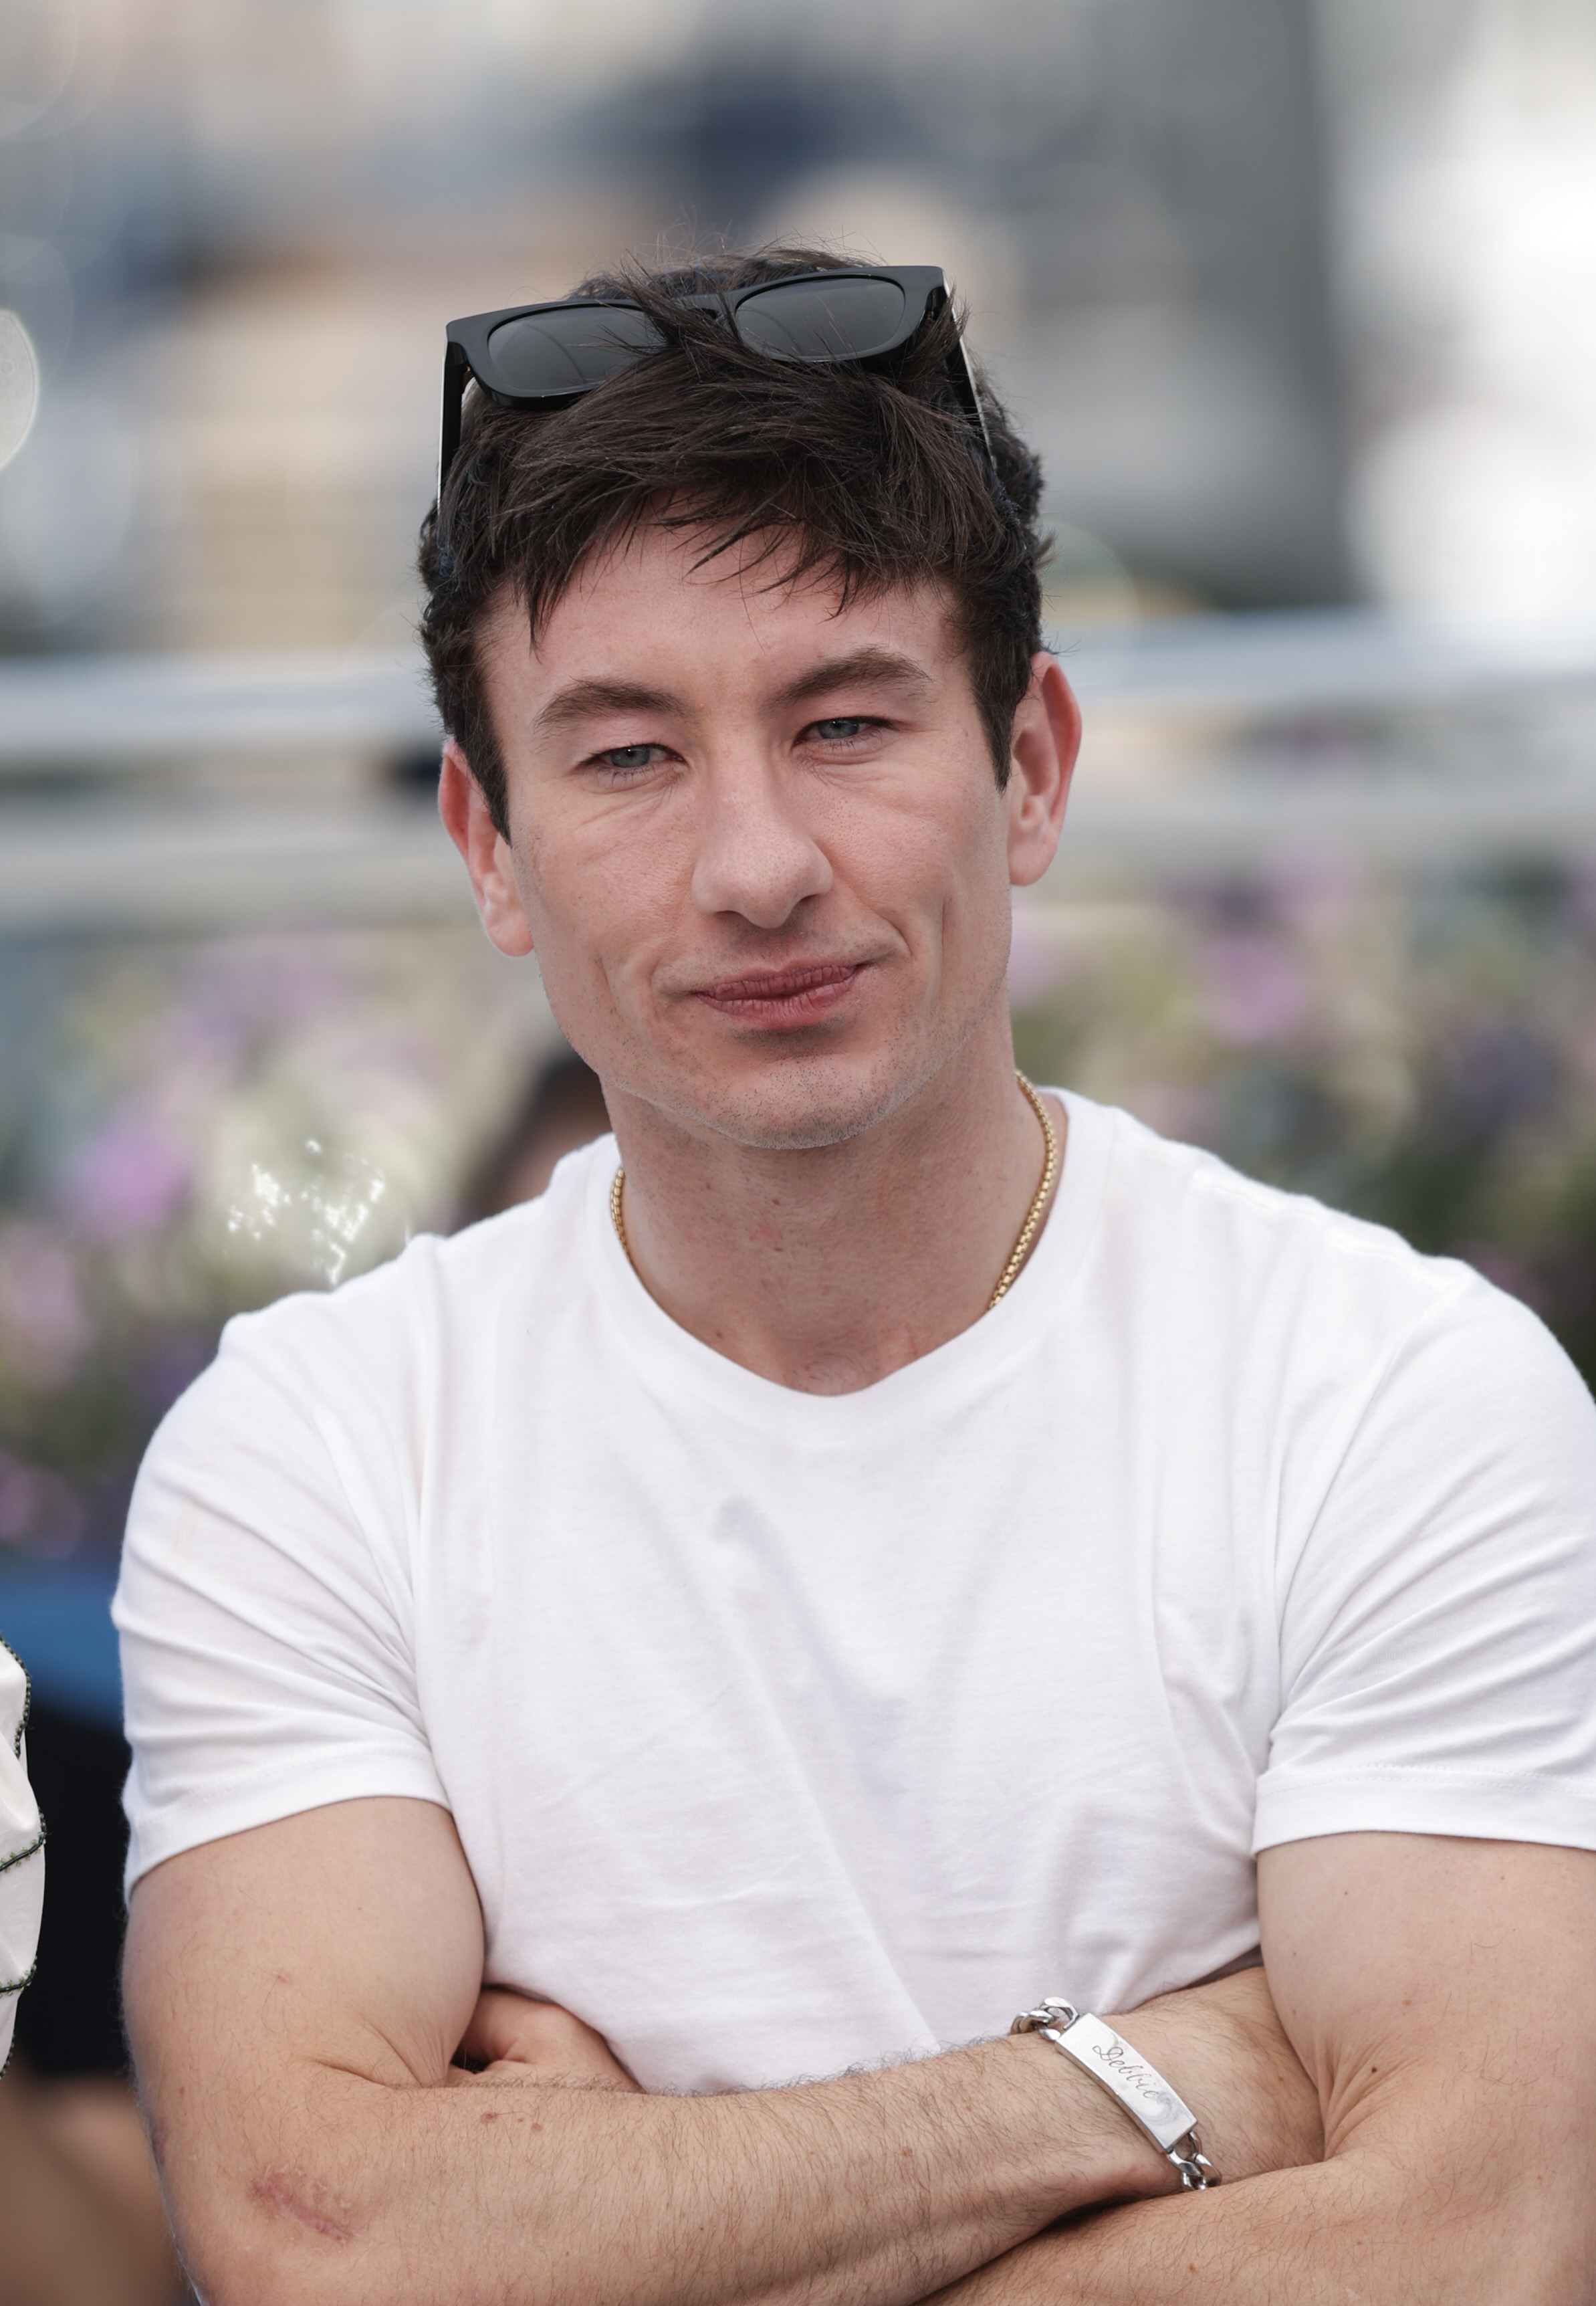 Barry Keoghan, with sunglasses resting on his head, smiles slightly while crossing his arms and wearing a casual white t-shirt